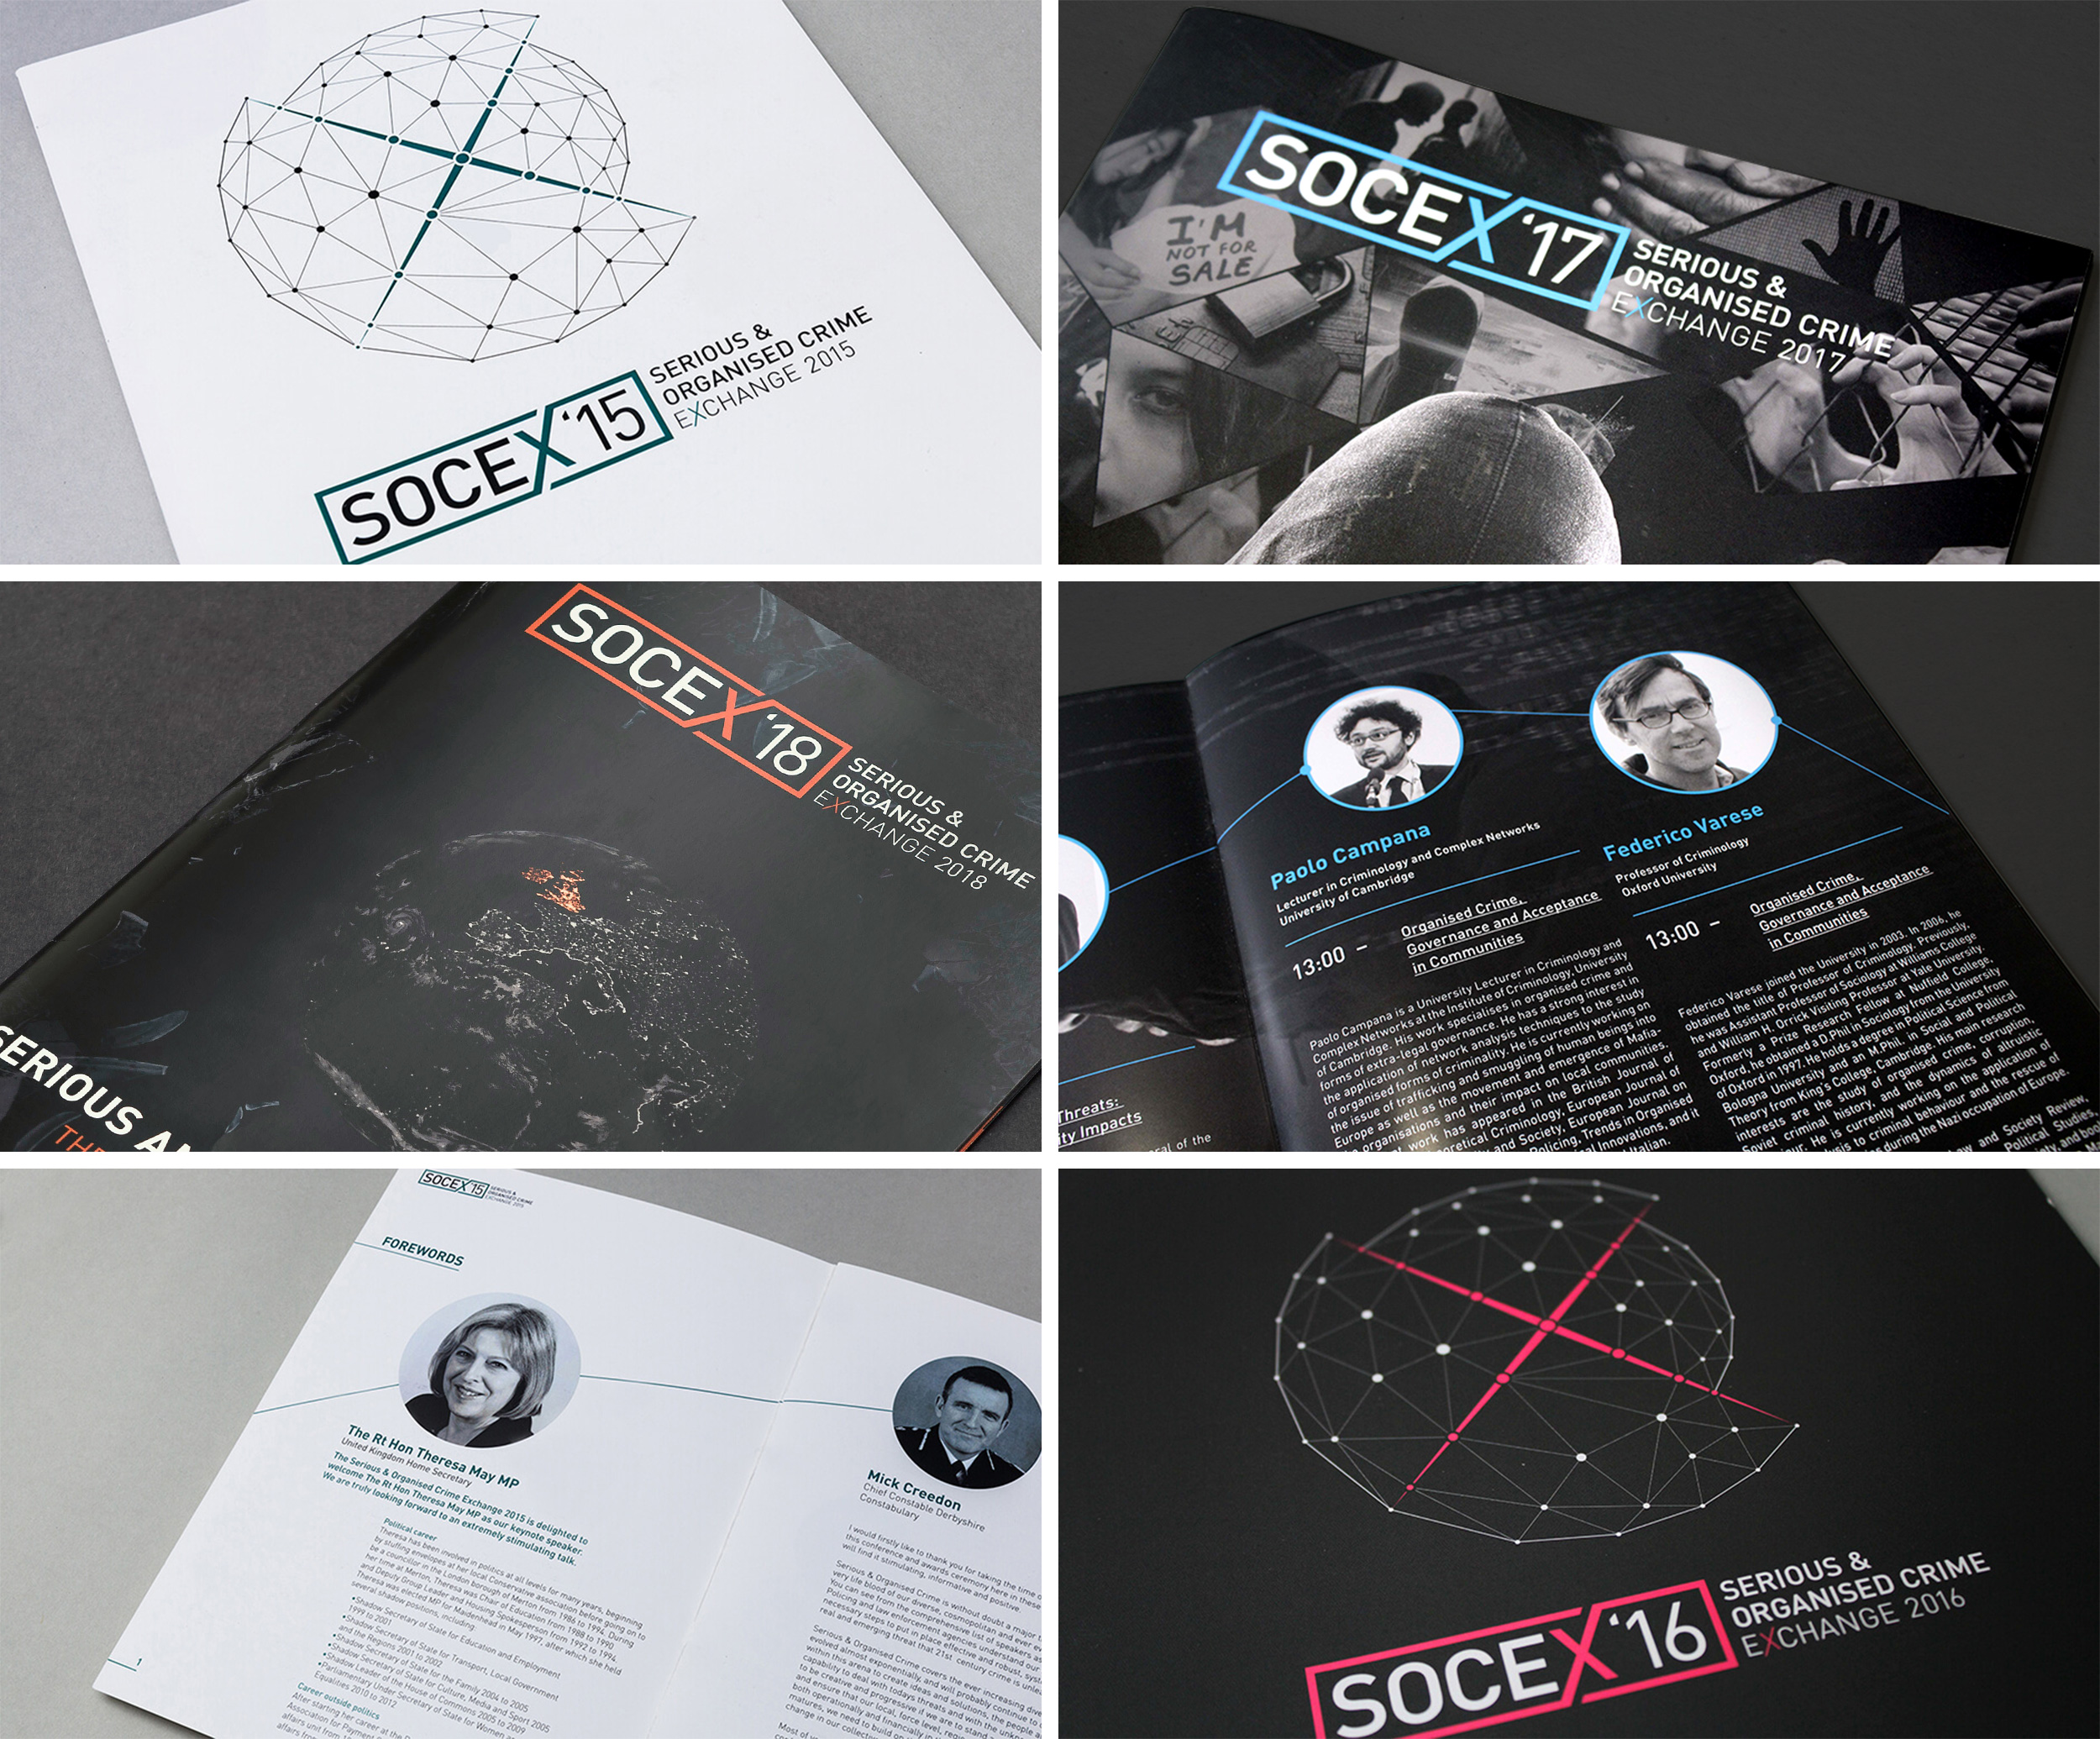 A brand marketing case-study for software companies, SOCEX marketing materials